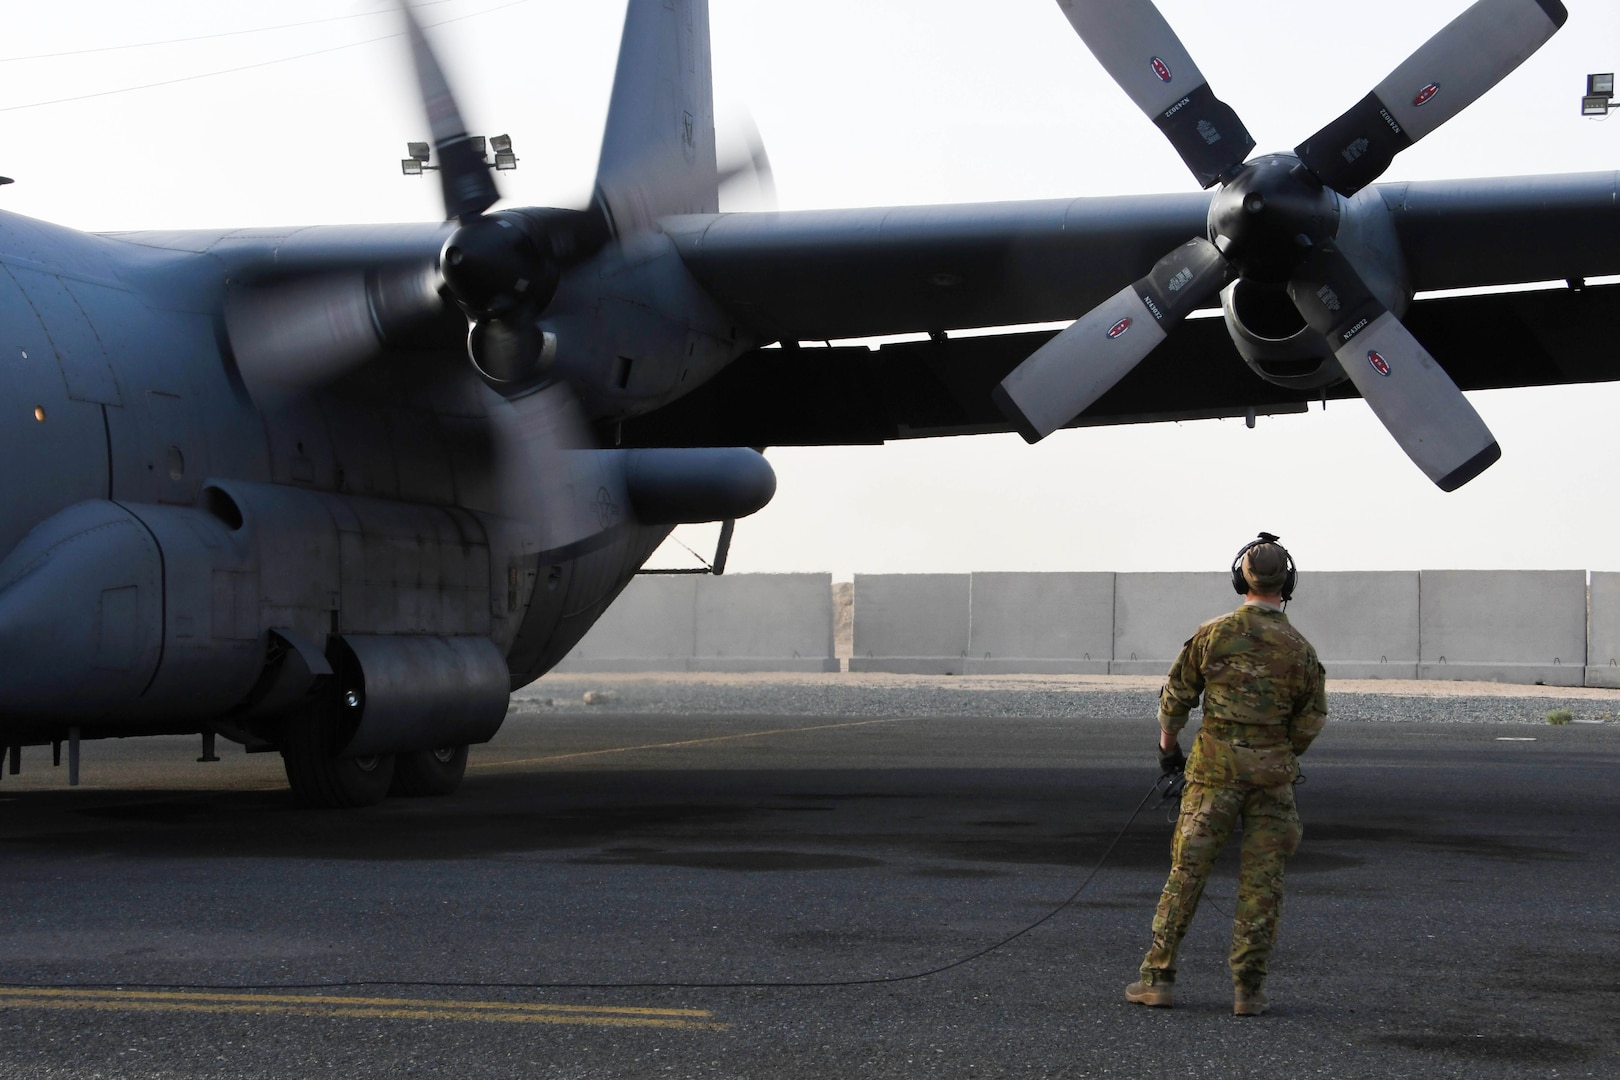 A 386th Expeditionary Operations Group airborne maintenance technician monitors an EC-130H Compass Call as it starts its engines on Dec. 5, 2016 at an undisclosed location in Southwest Asia. The Compass Call is engaged in operations jamming Da’esh communications in order to confuse and disorient enemy fighters. (U.S. Air Force photo by Senior Airman Andrew Park)